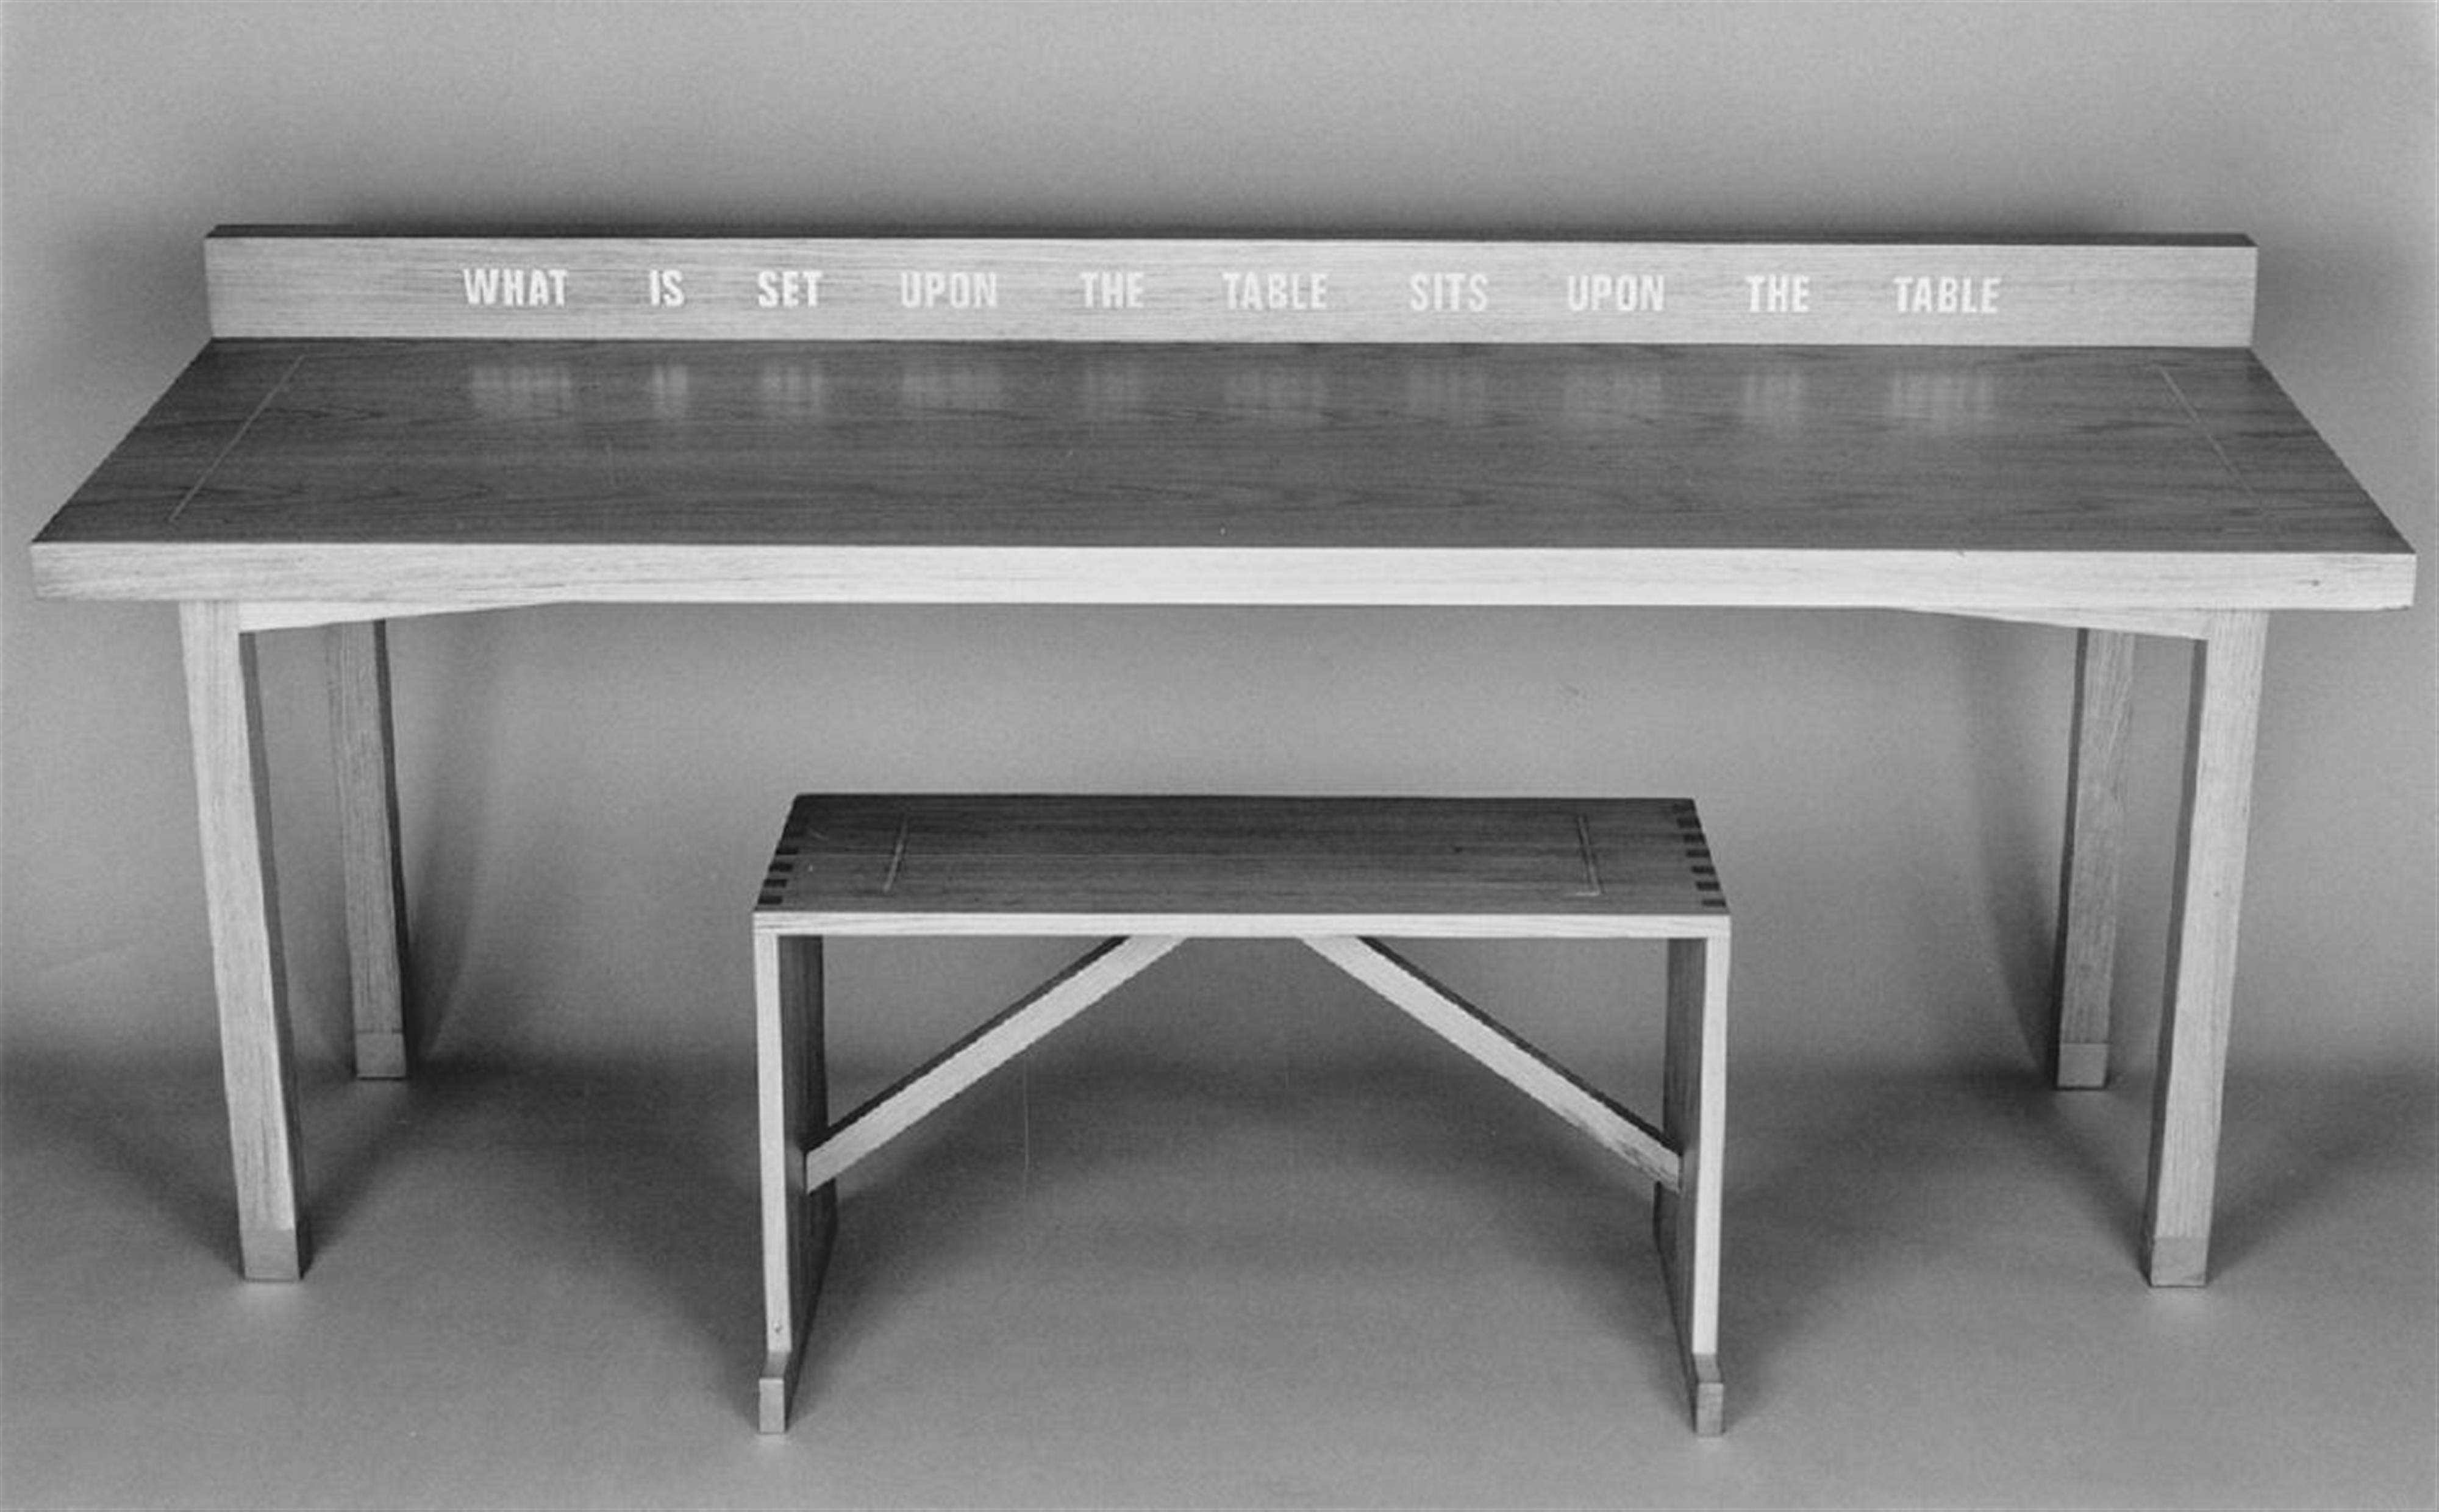 Lawrence Weiner - What is set upon the table sits upon the table